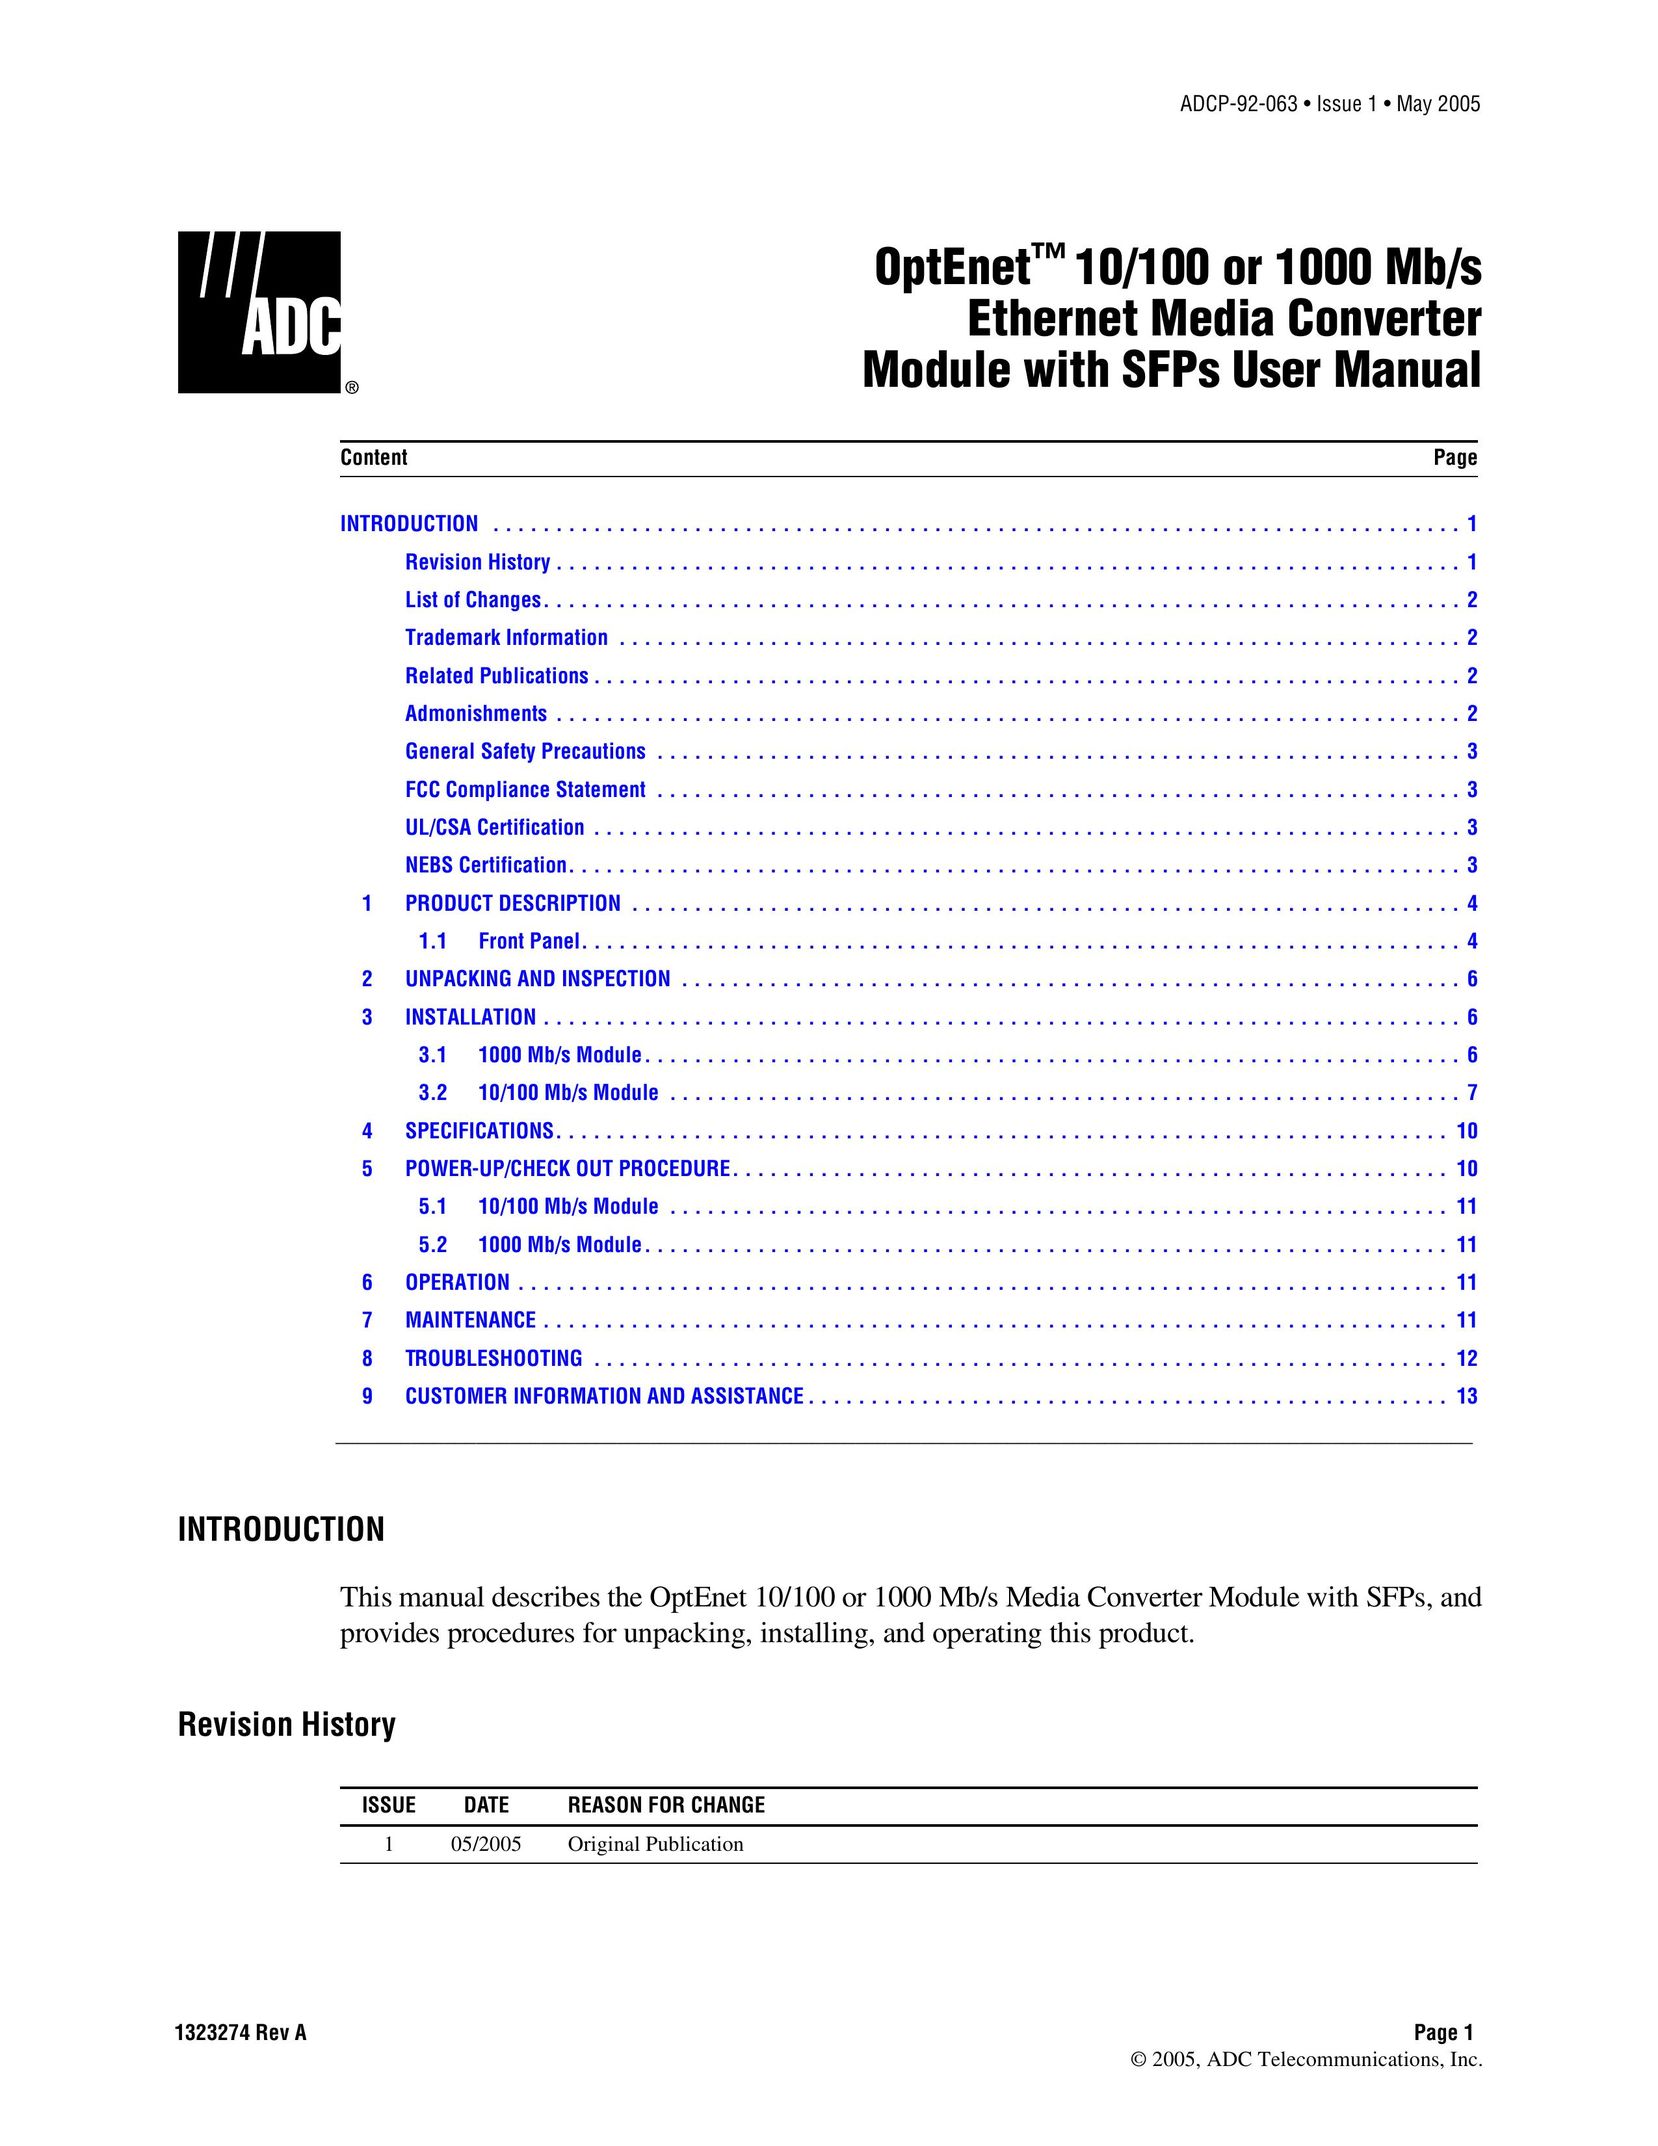 ADC 10 Power Supply User Manual